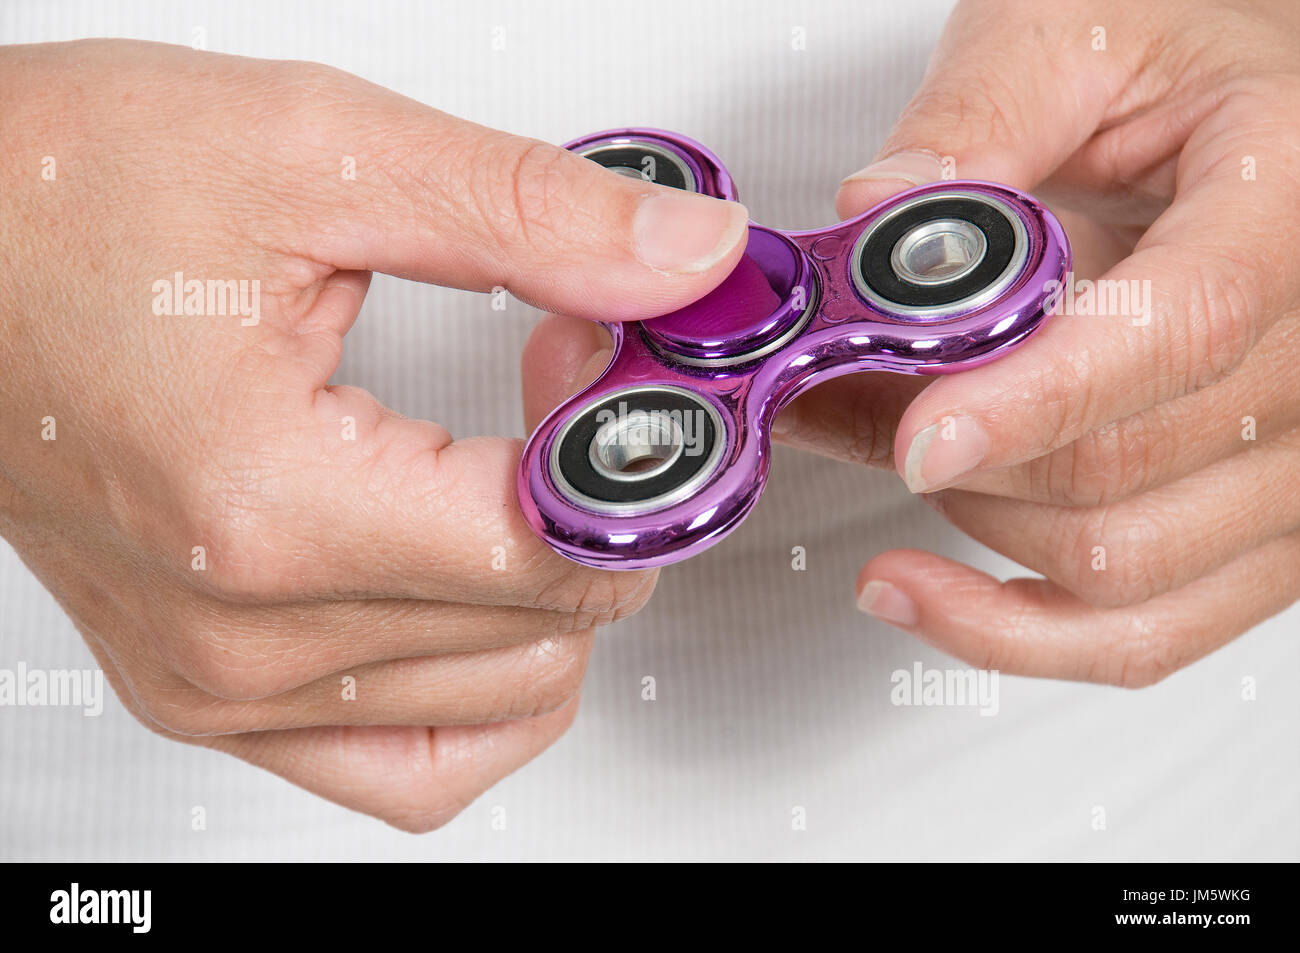 Popular fidget spinner toy that is the latest fad Stock Photo - Alamy